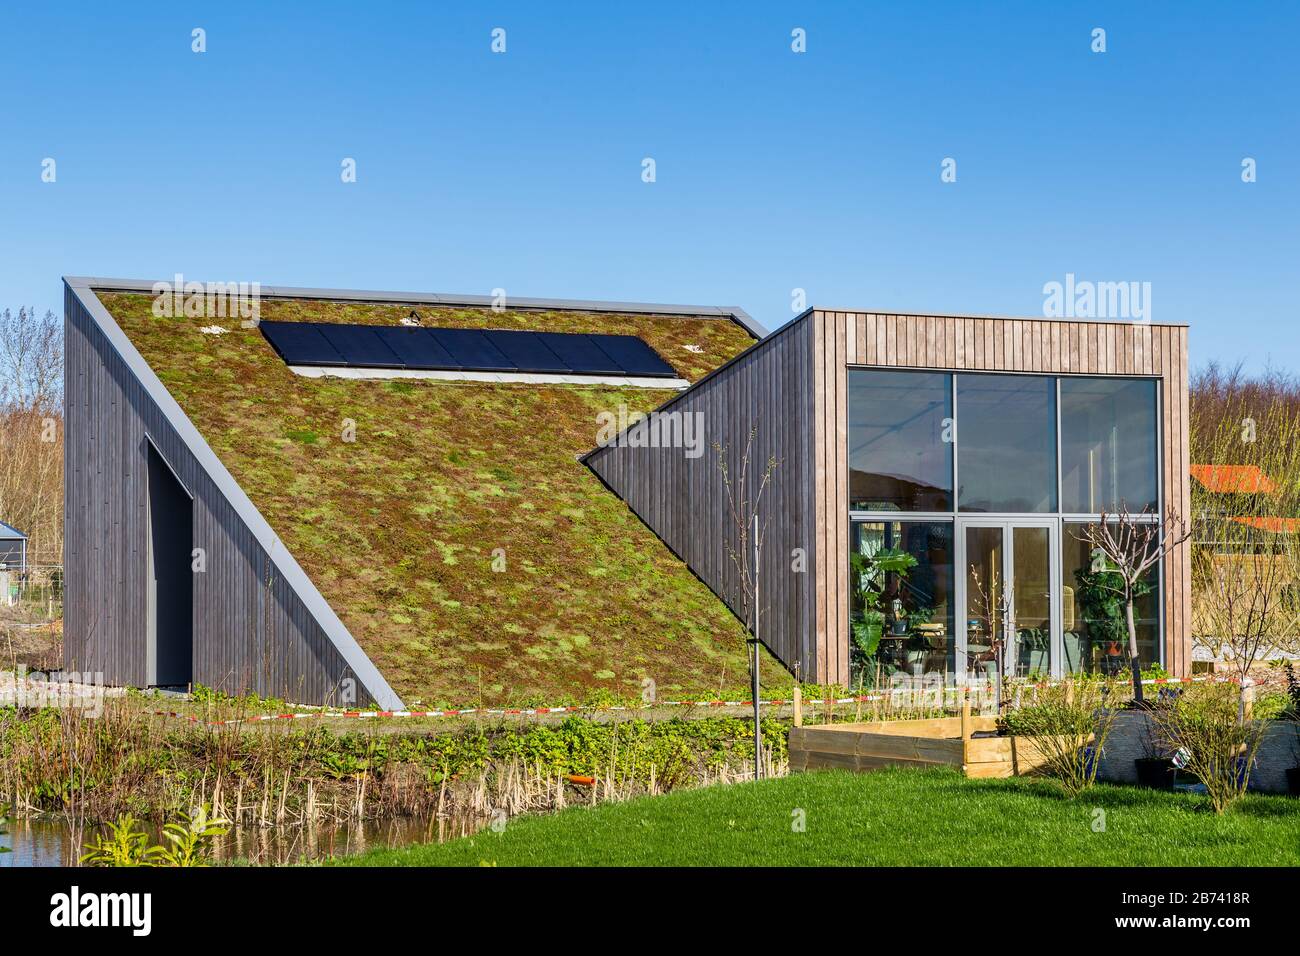 Almere, Netherlands,March 12, 2020: Modern Eco friendly tiny house in experimental new sustainable district Oosterwold in Almere. Stock Photo